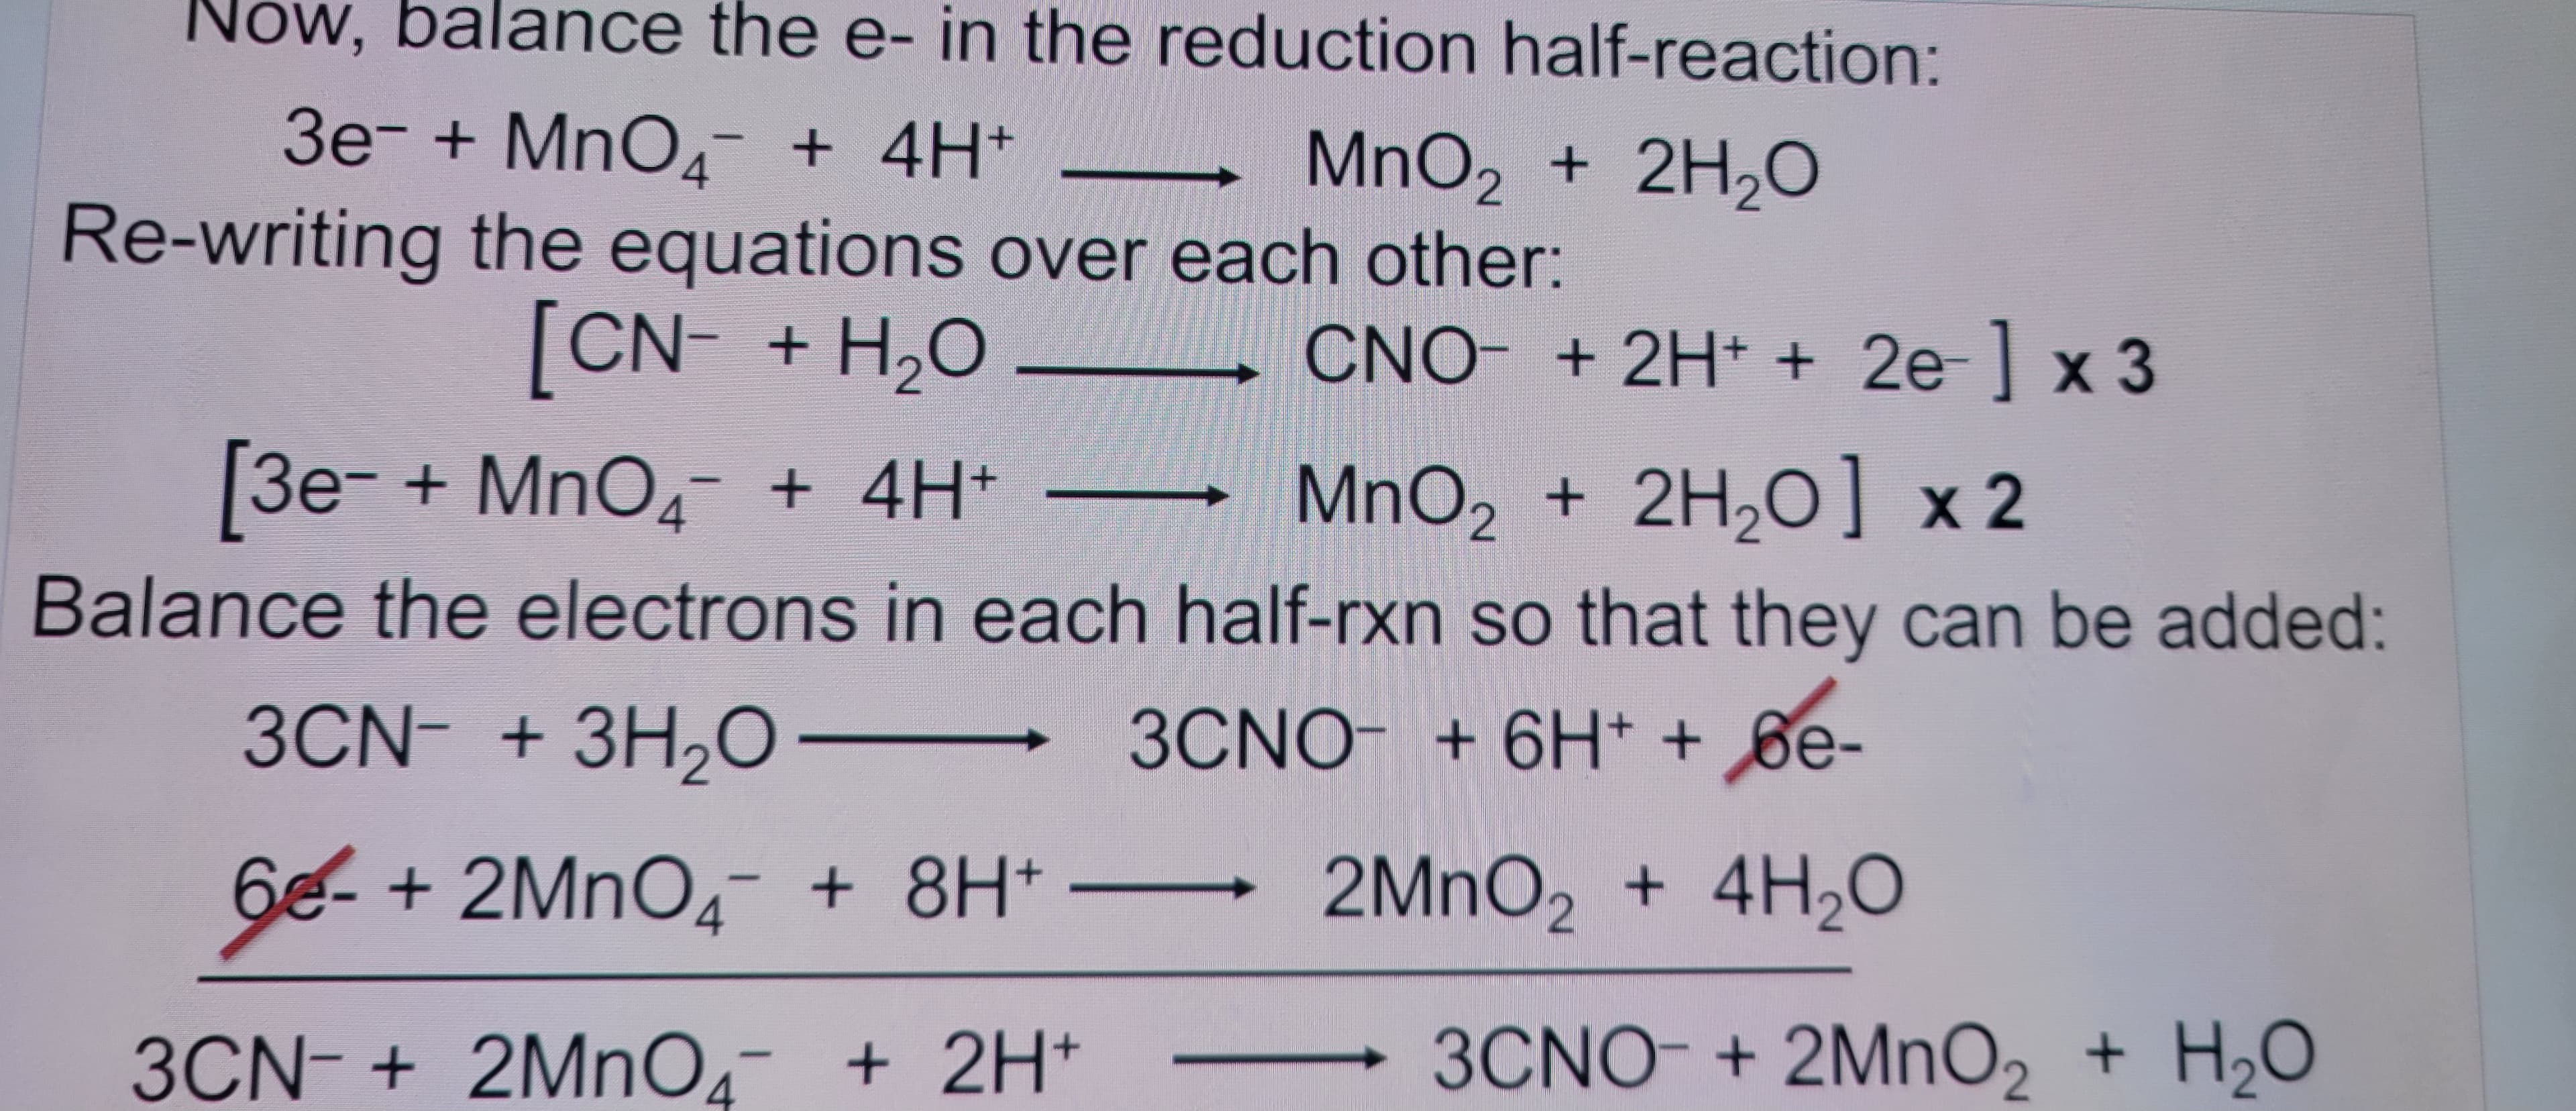 Now, balance the e- in the reduction half-reaction:
3е¯ + MnО¯ + 4H+
MnO2 + 2H2O
Re-writing the equations over each other:
[CN + H₂O
[3e- + MnO4¯ + 4H+
CNO- + 2H+ + 2e-] x3
MnO2 + 2H2O] x2
Balance the electrons in each half-rxn so that they can be added:
3CN- + 3H2O-
3CNO + 6H++ 6e-
6-+2MnO4 + 8H+
2MnO2 + 4H₂O
3CN + 2MnO4 + 2H+
3CNO + 2MnO2 + H2O